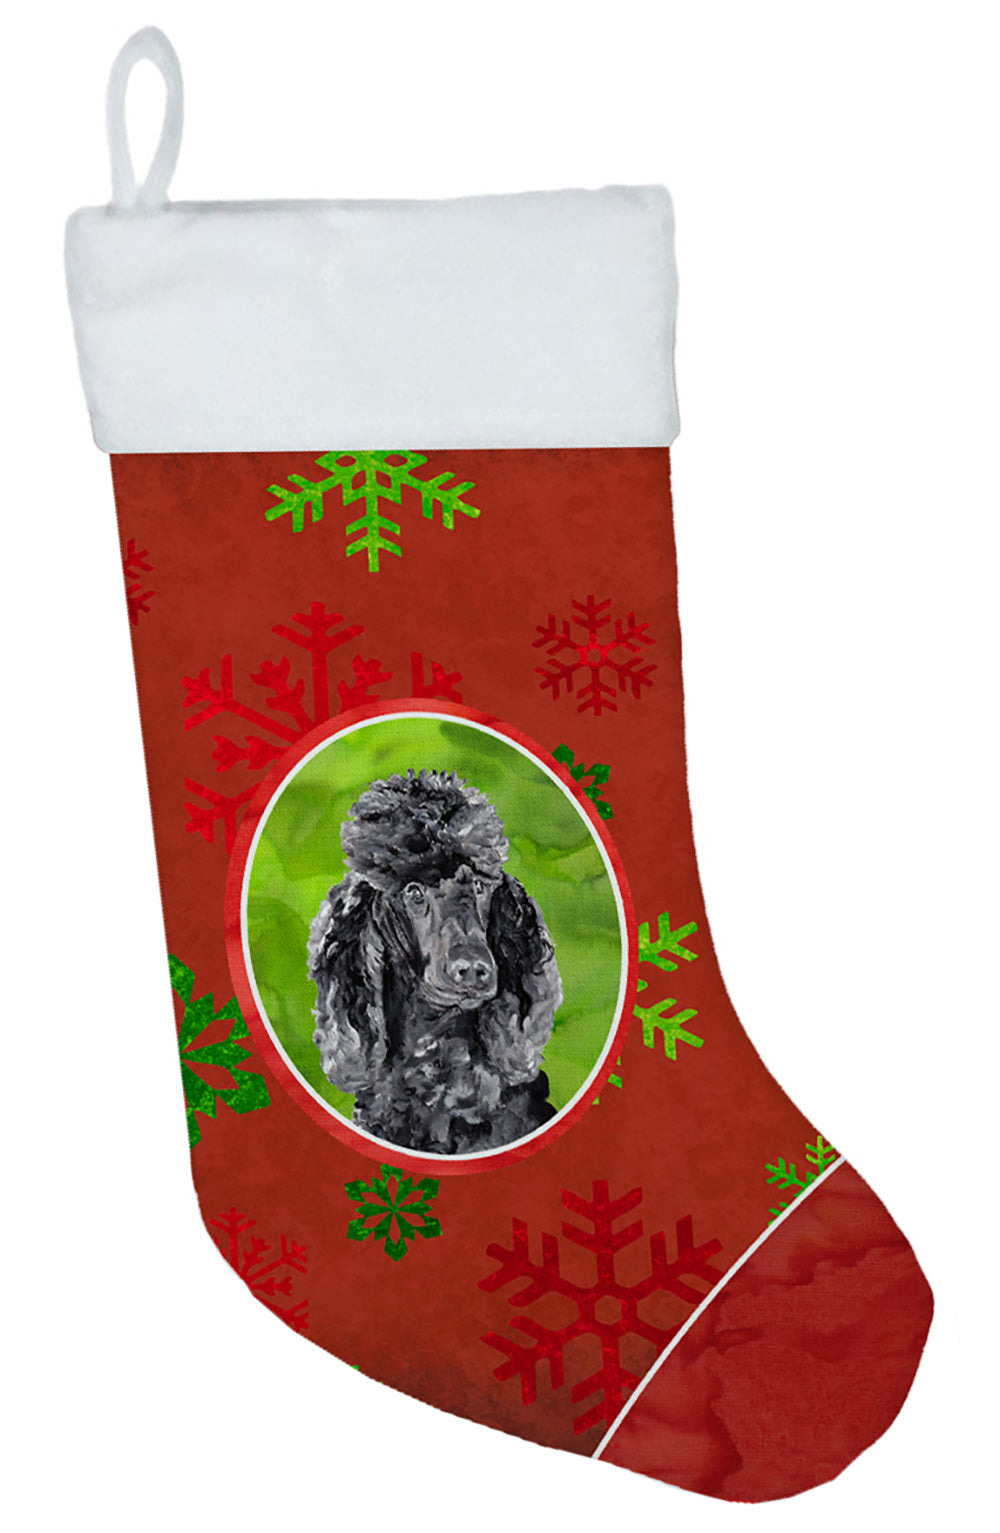 Black Standard Poodle Red Snowflakes Holiday Christmas Stocking SC9746-CS